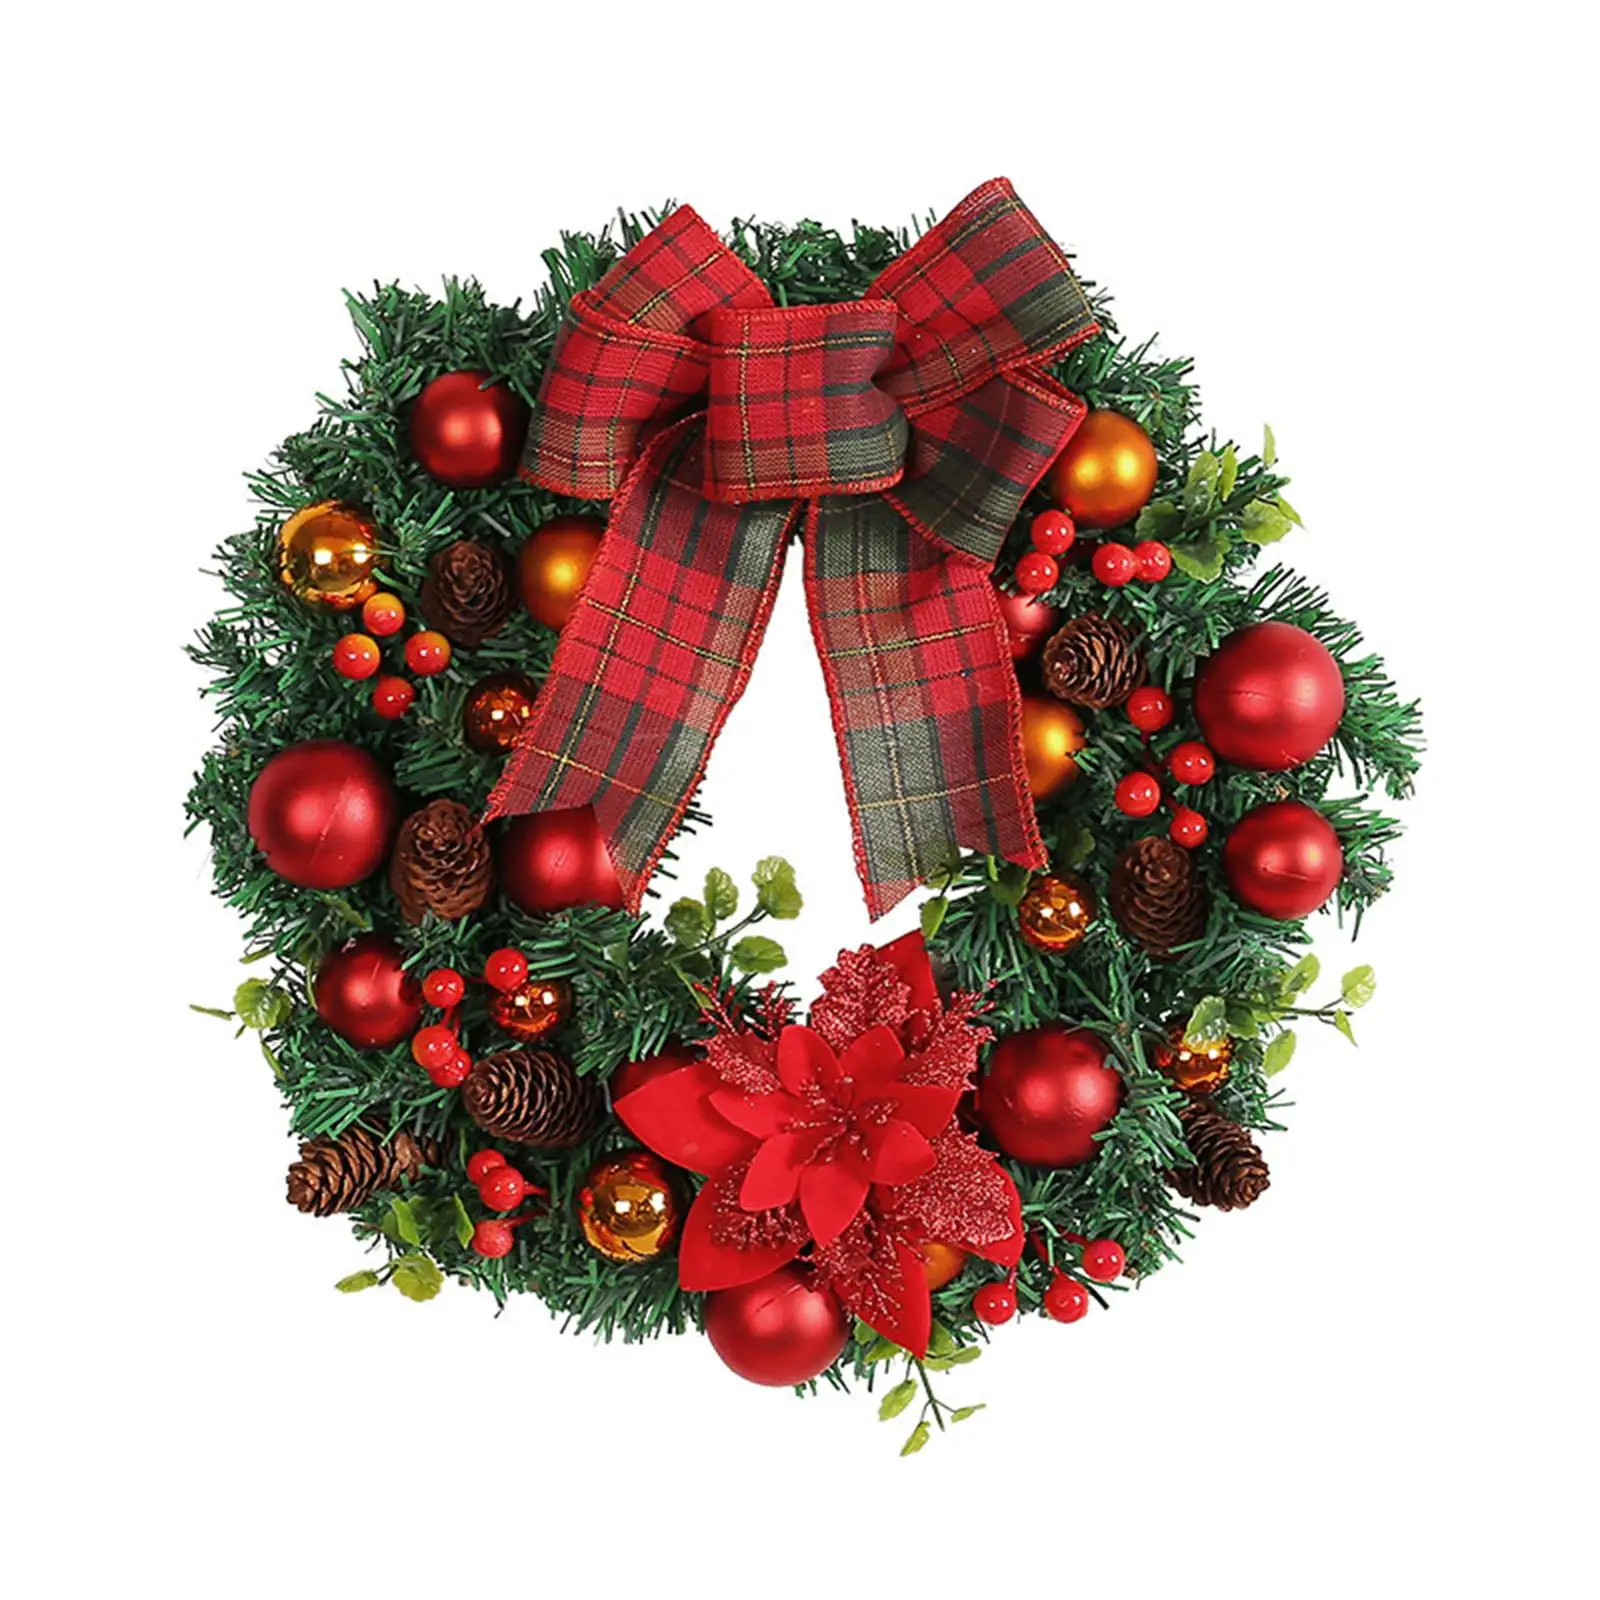 Artificial Christmas Wreath Outside Indoor Outdoor Holiday Garland Decoration for Fireplace Garden Wedding Living Room Party